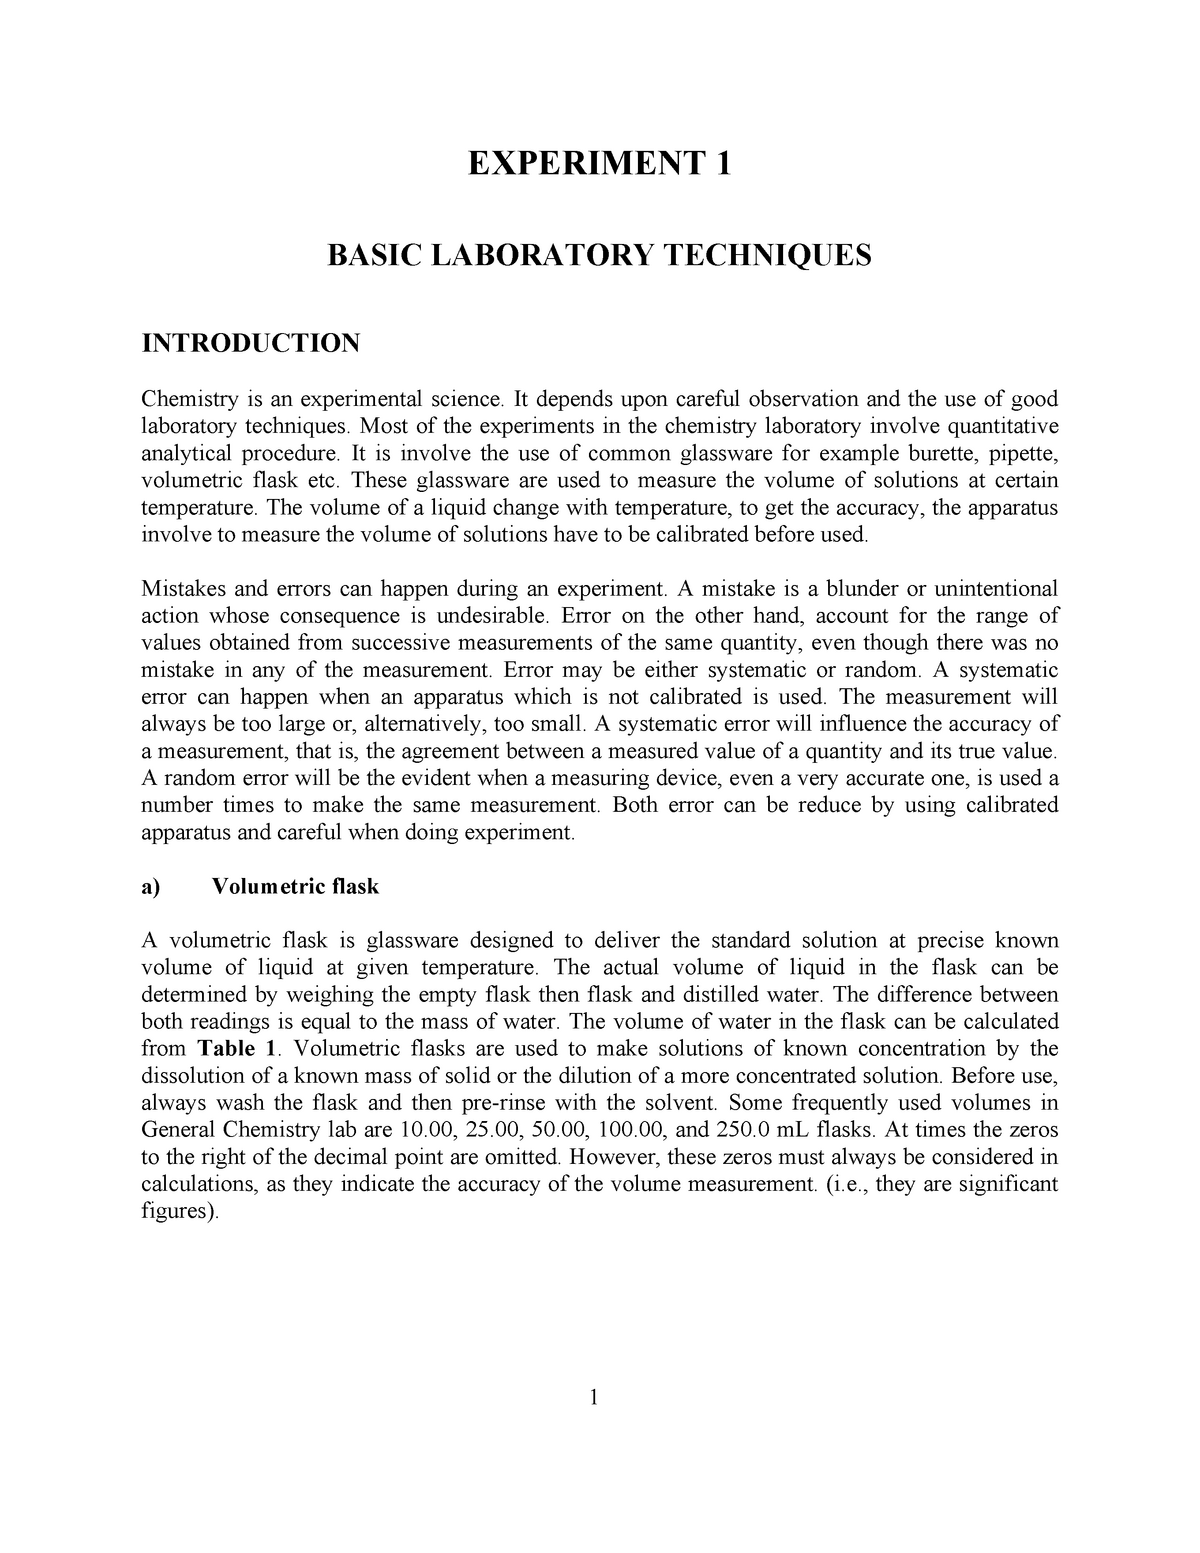 laboratory assignment laboratory techniques answers